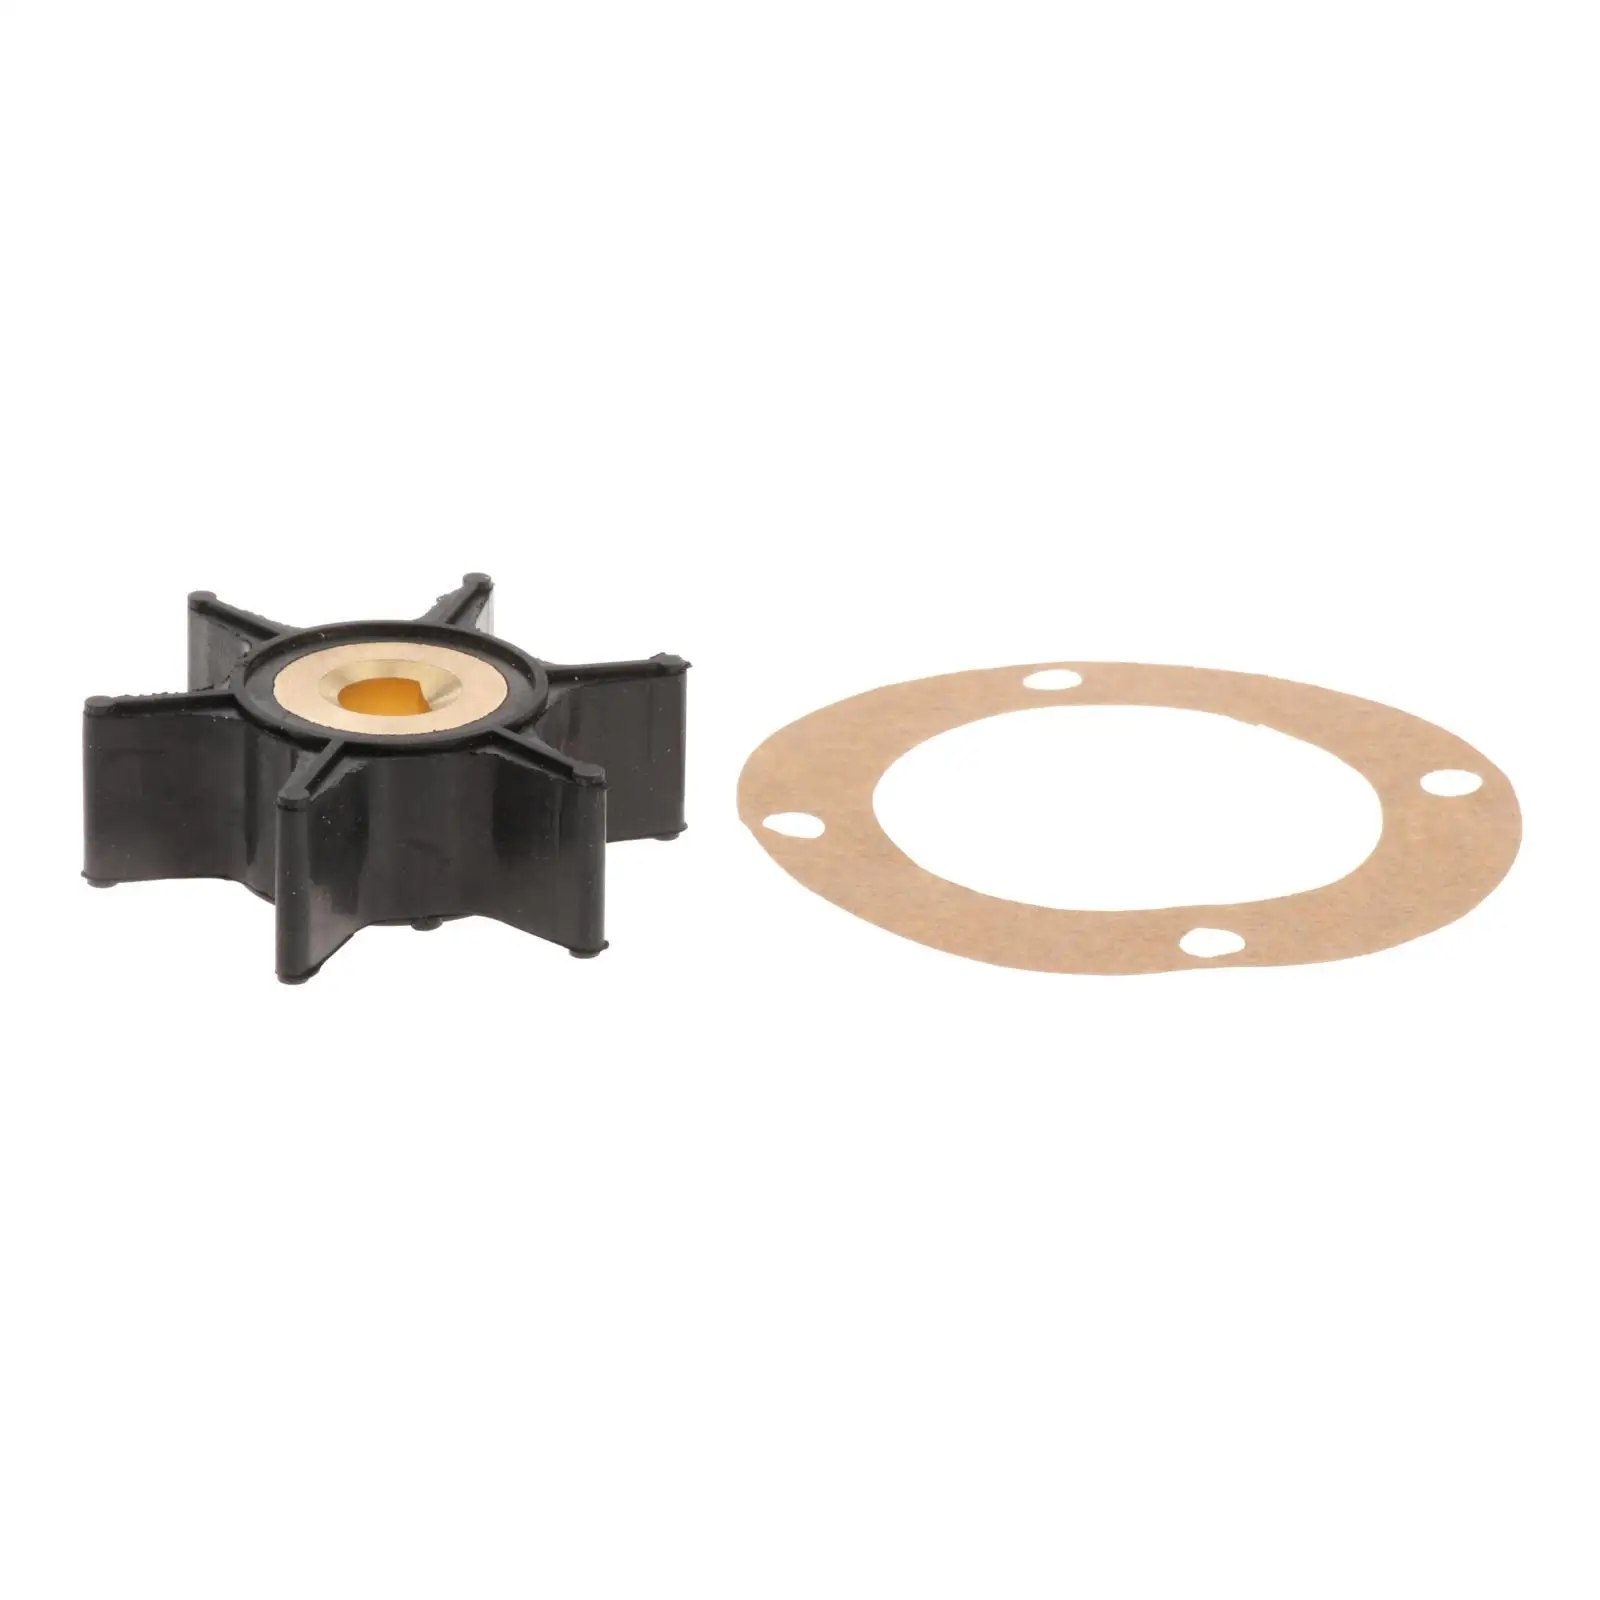 2x Impeller and 4-Hole Gasket Kit Replacement for Onan 131-0386 170-3172 Water Pump